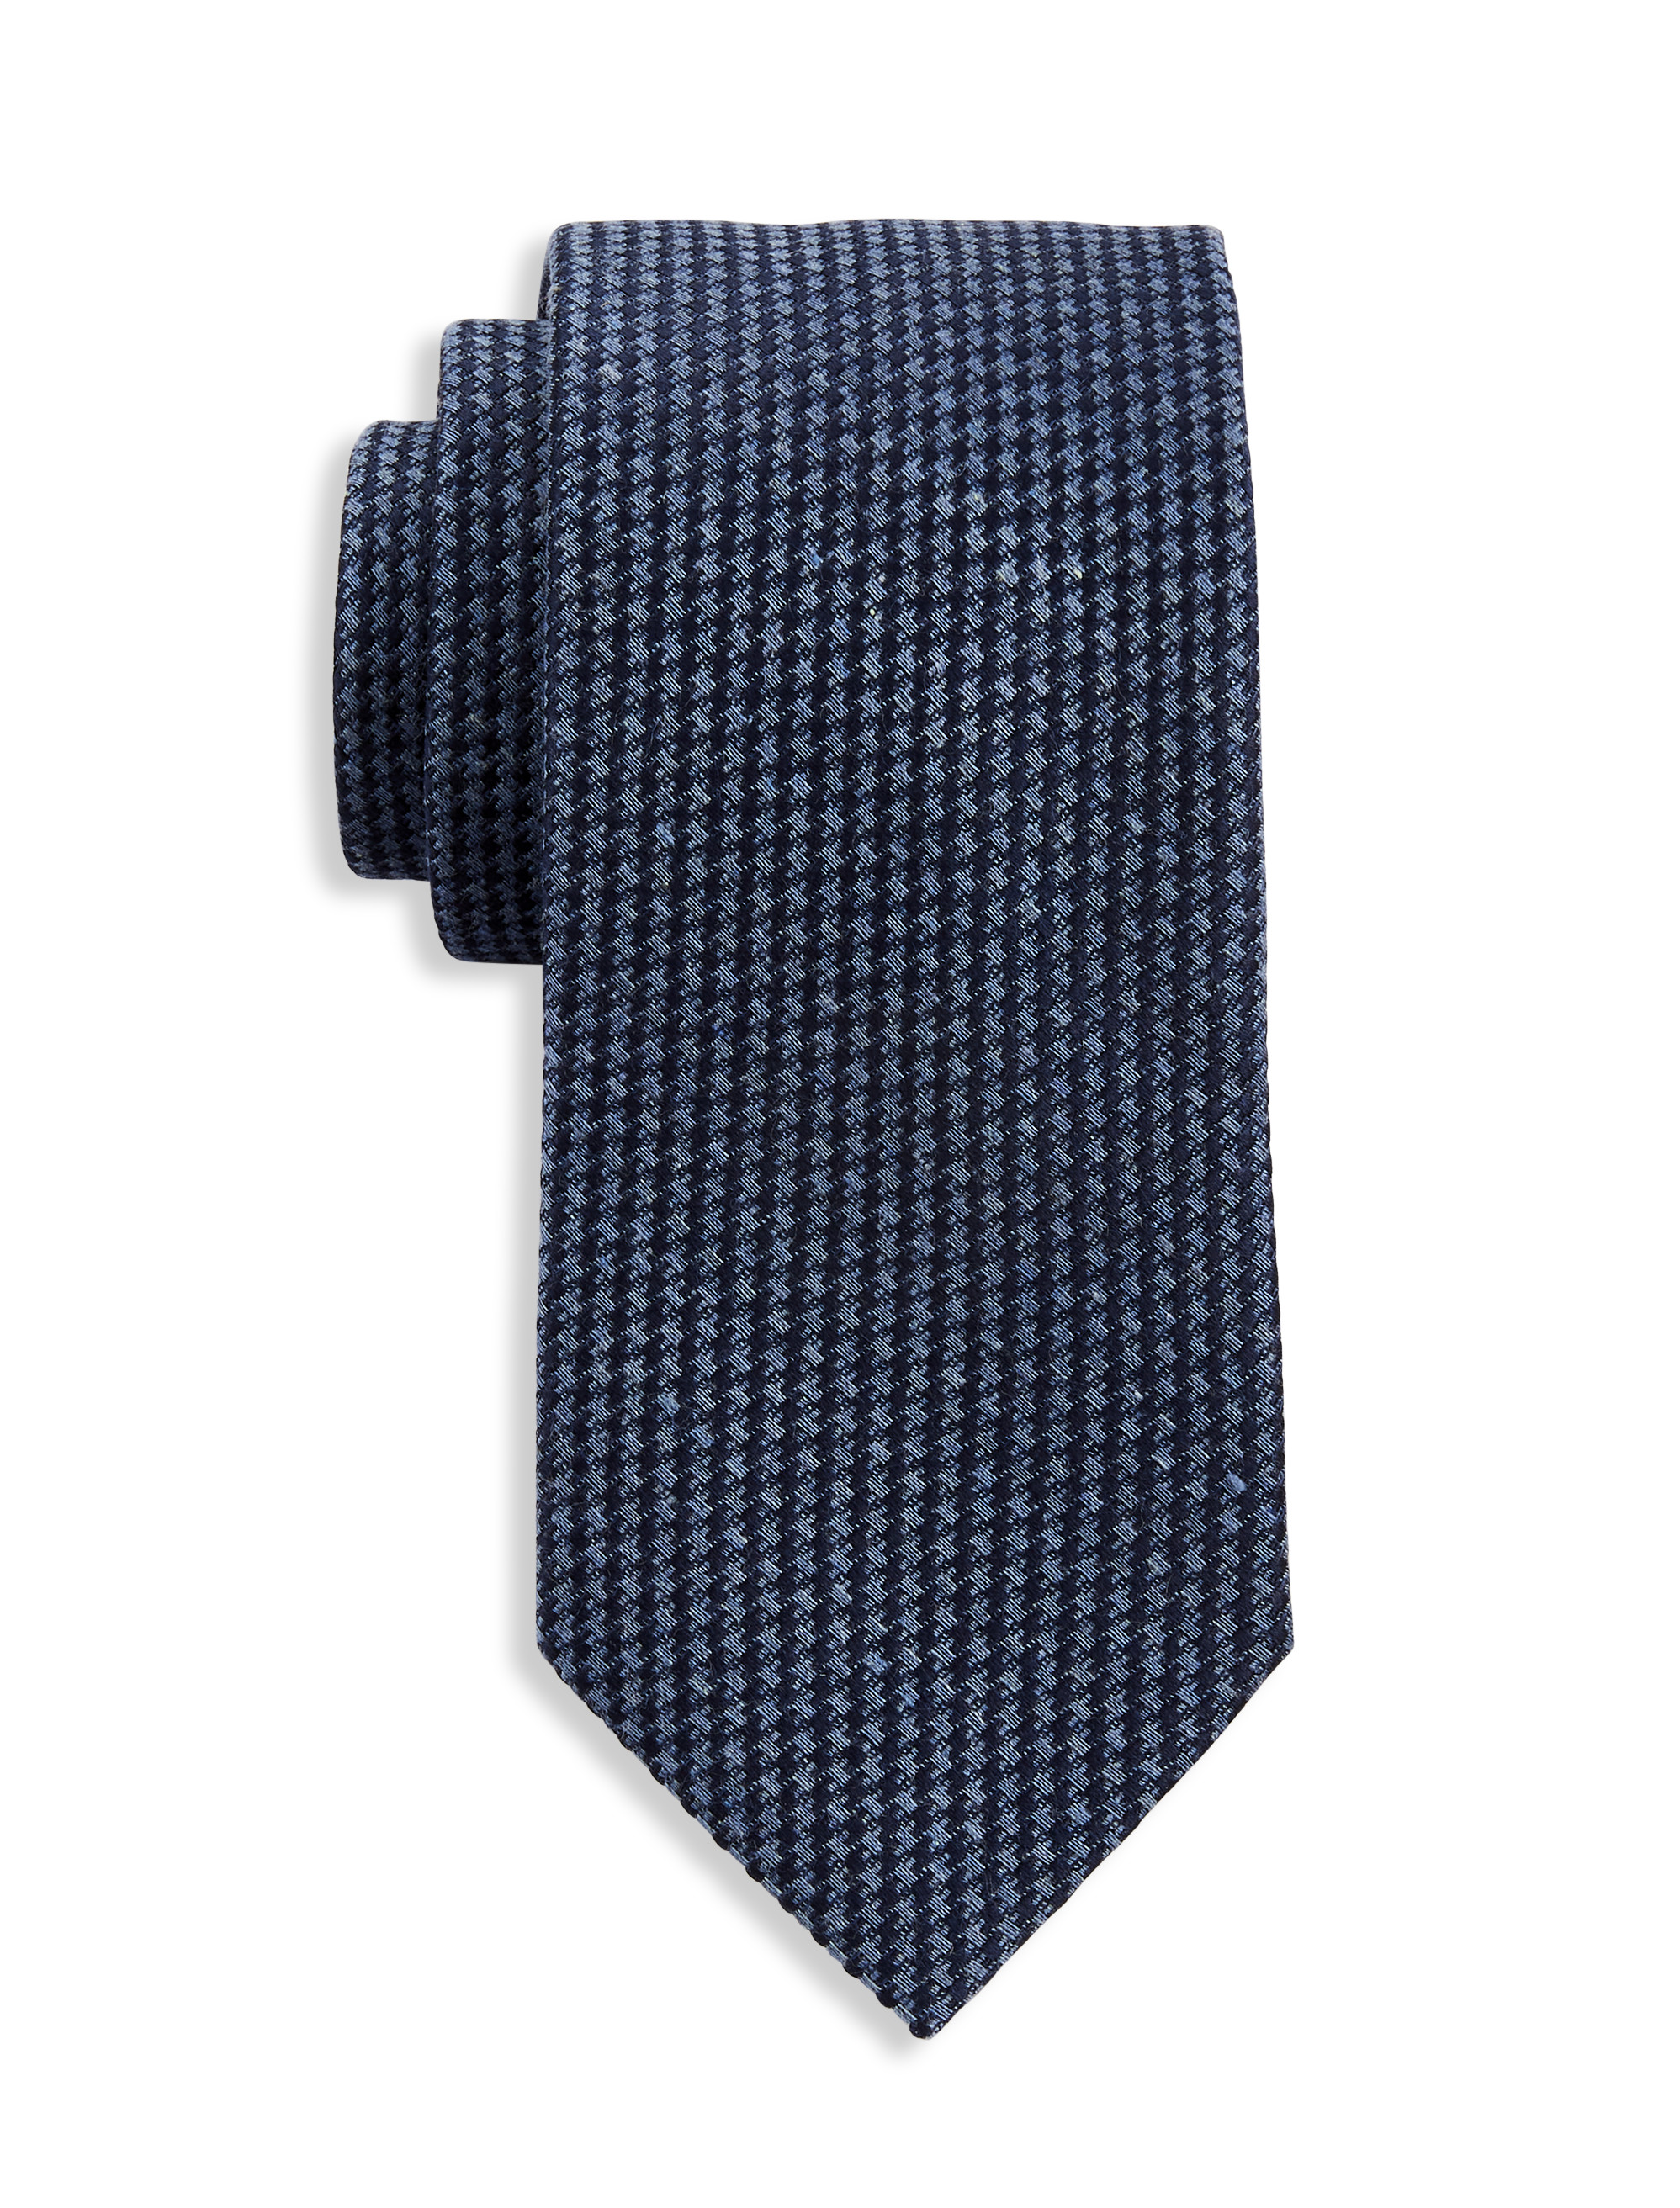 Houndstooth Patterned Tie